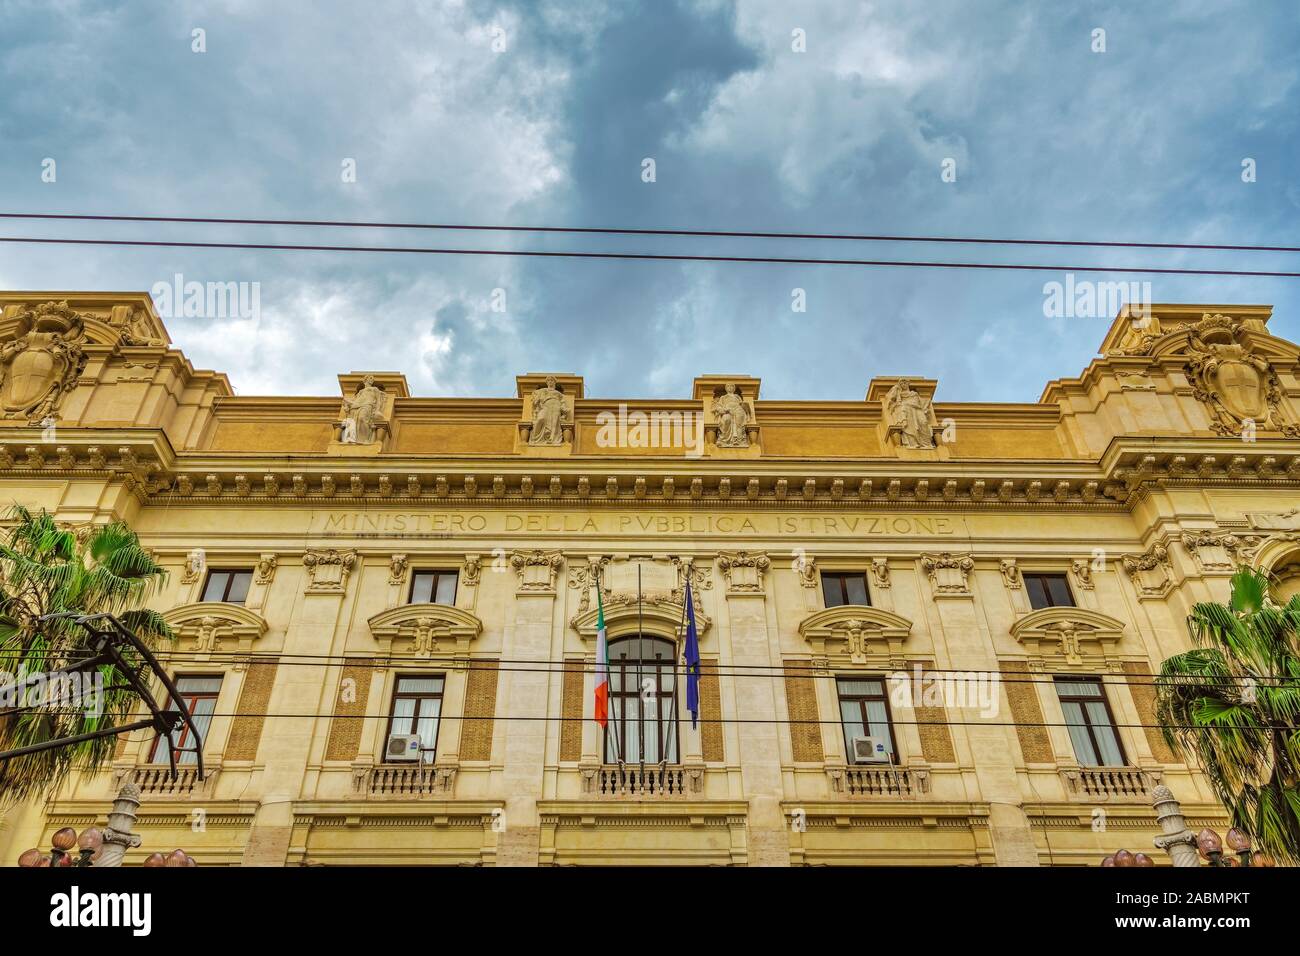 Rome Italian government ministry facade with flags. Ministry of Education, University & Research Ministero dell Istruzione MIUR at Trastevere area. Stock Photo